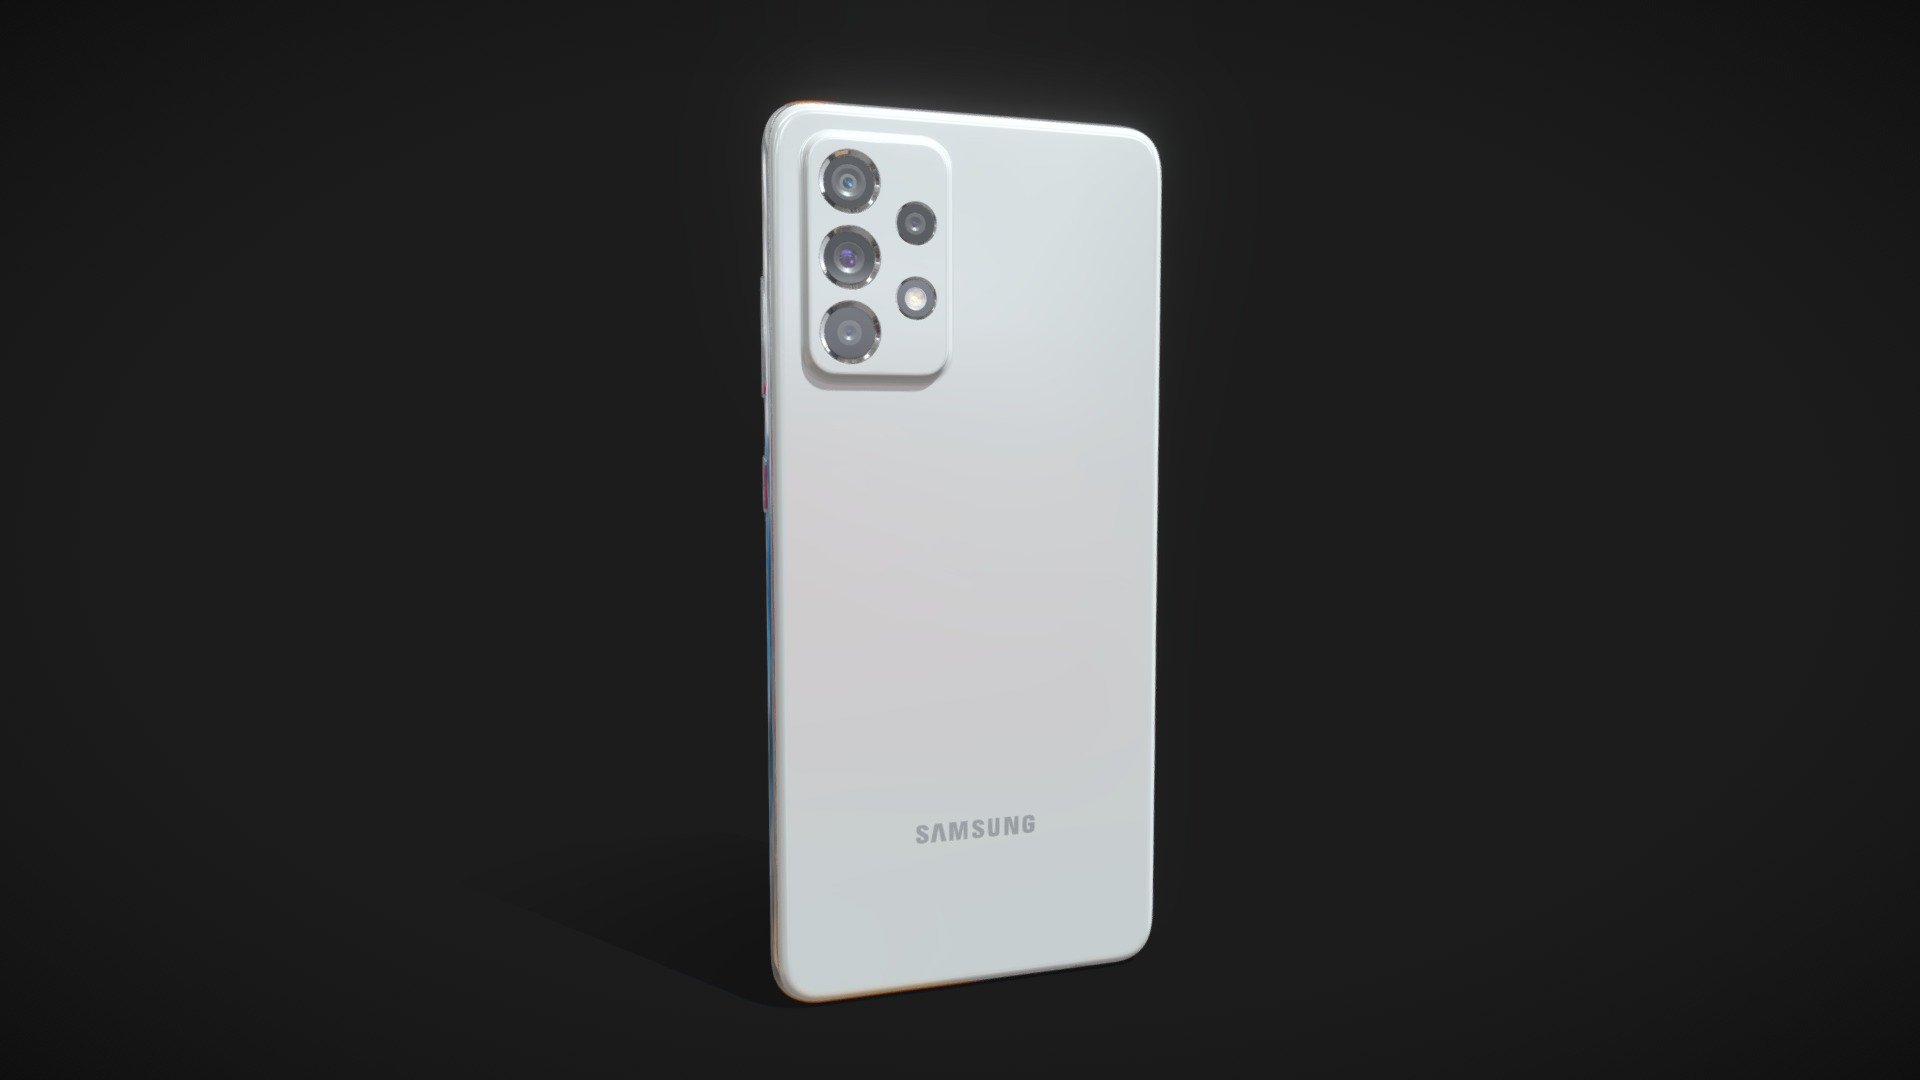 Samsung Galaxy A52.

This set:
- 1 file obj standard
- 1 file 3ds Max 2013 vray material 
- 1 file 3ds Max 2013 corona material
- 1 file of 3Ds
- 1 file e3d full set of materials.
- 1 file cinema 4d standard.
- 1 file blender cycles.

Topology of geometry:




forms and proportions of The 3D model

the geometry of the model was created very neatly

there are no many-sided polygons

detailed enough for close-up renders

the model optimized for turbosmooth modifier

Not collapsed the turbosmooth modified

apply the Smooth modifier with a parameter to get the desired level of detail

Materials and Textures:




3ds max files included Vray-Shaders

3ds max files included Corona-Shaders

file e3d full set of materials

all texture paths are cleared

Organization of scene:




to all objects and materials

real world size (system units - mm)

coordinates of location of the model in space (x0, y0, z0)

does not contain extraneous or hidden objects (lights, cameras, shapes etc.)
 - Samsung Galaxy A52 - Buy Royalty Free 3D model by madMIX 3d model